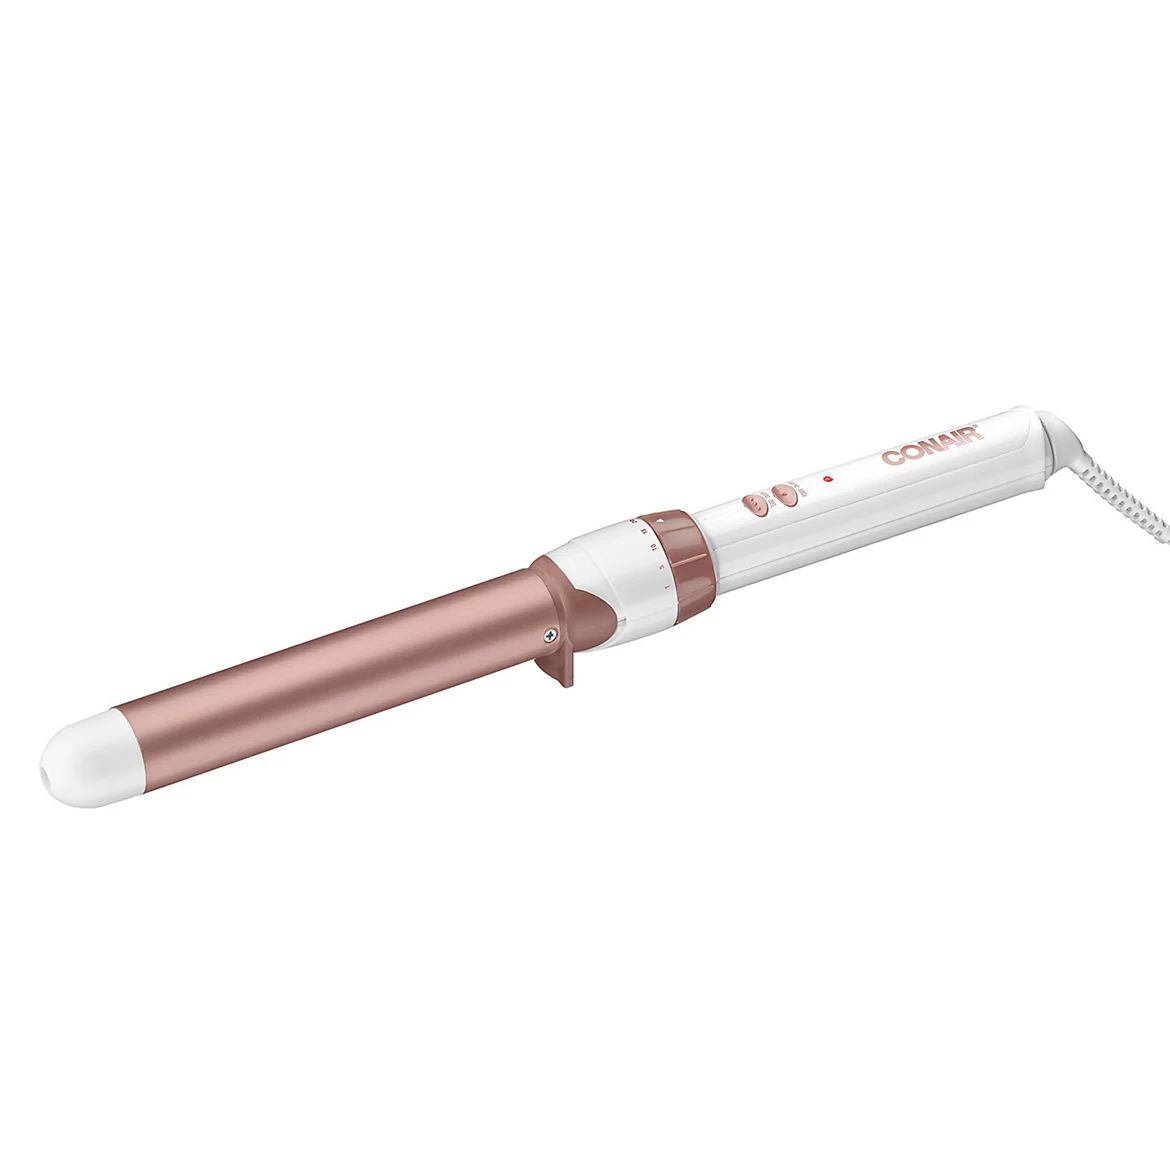 Conair Double Ceramic 1-inch Curling Wand | Kohl's